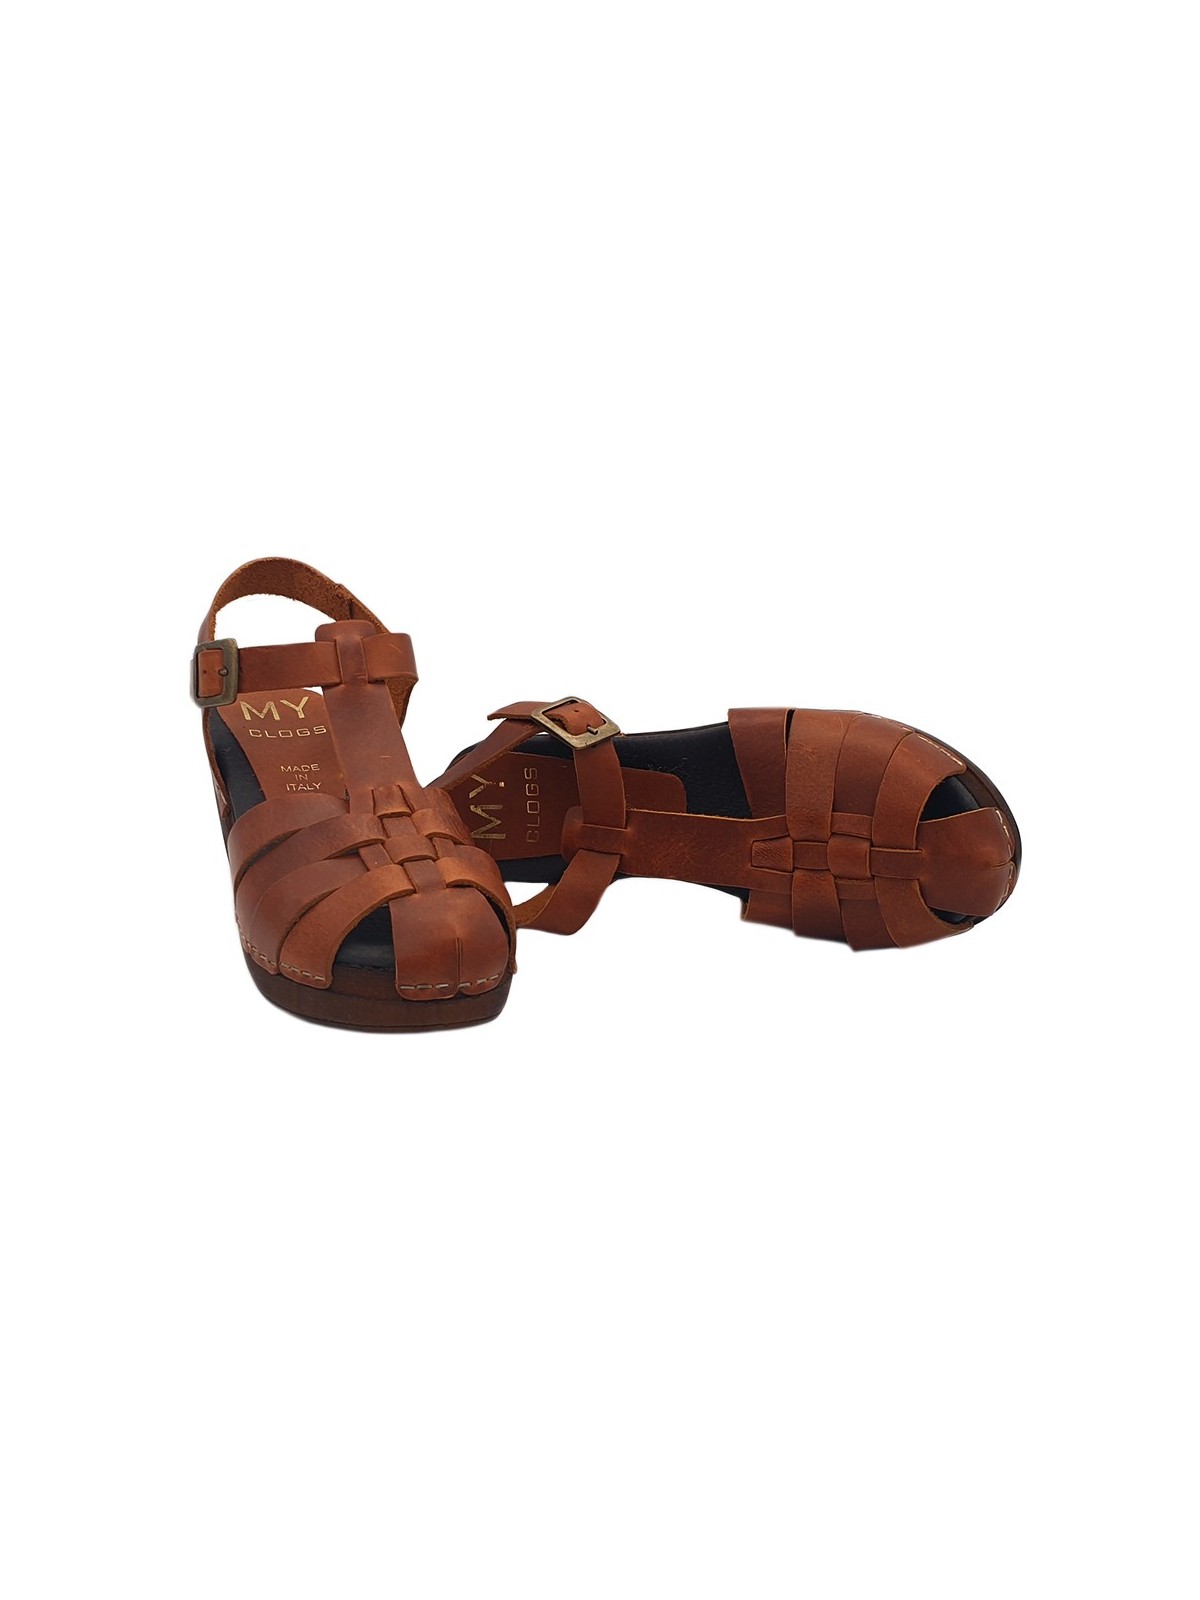 CLOGS BROWN COLOURED IN LEATHER HEEL 7